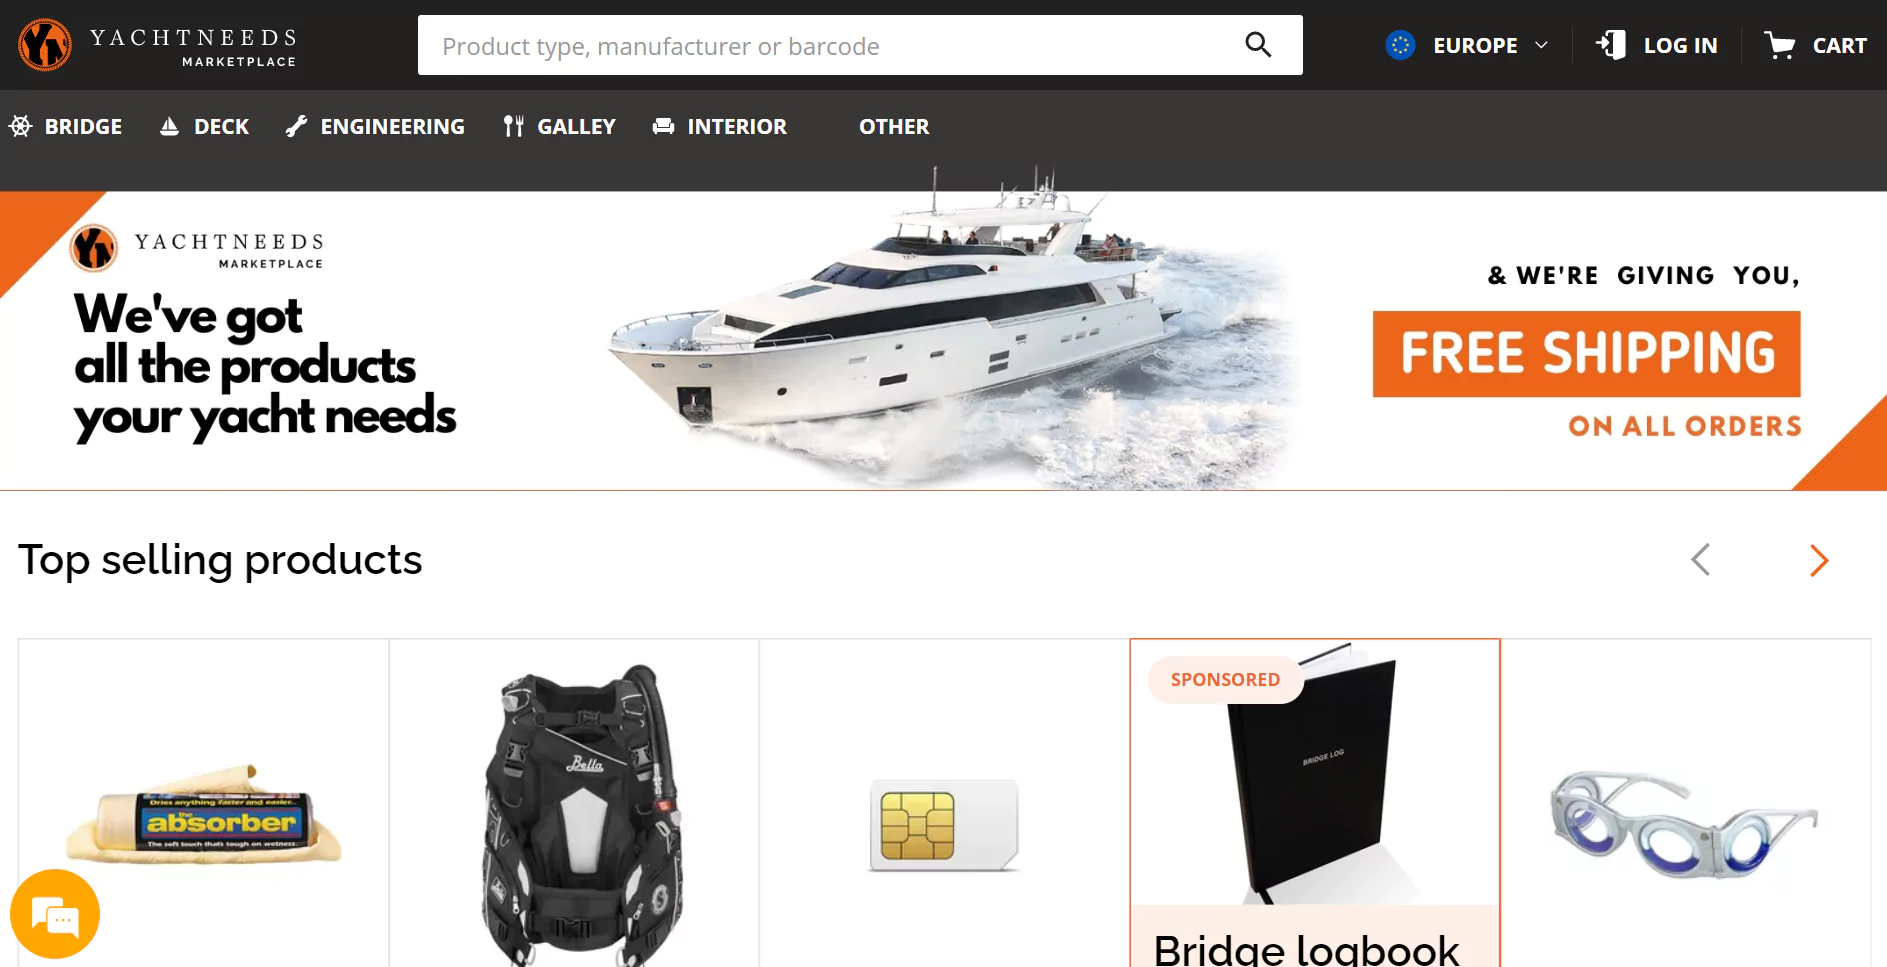 baccana-digital-consulting-client-yachtneeds-marketplace-de-yacthing-a-monaco